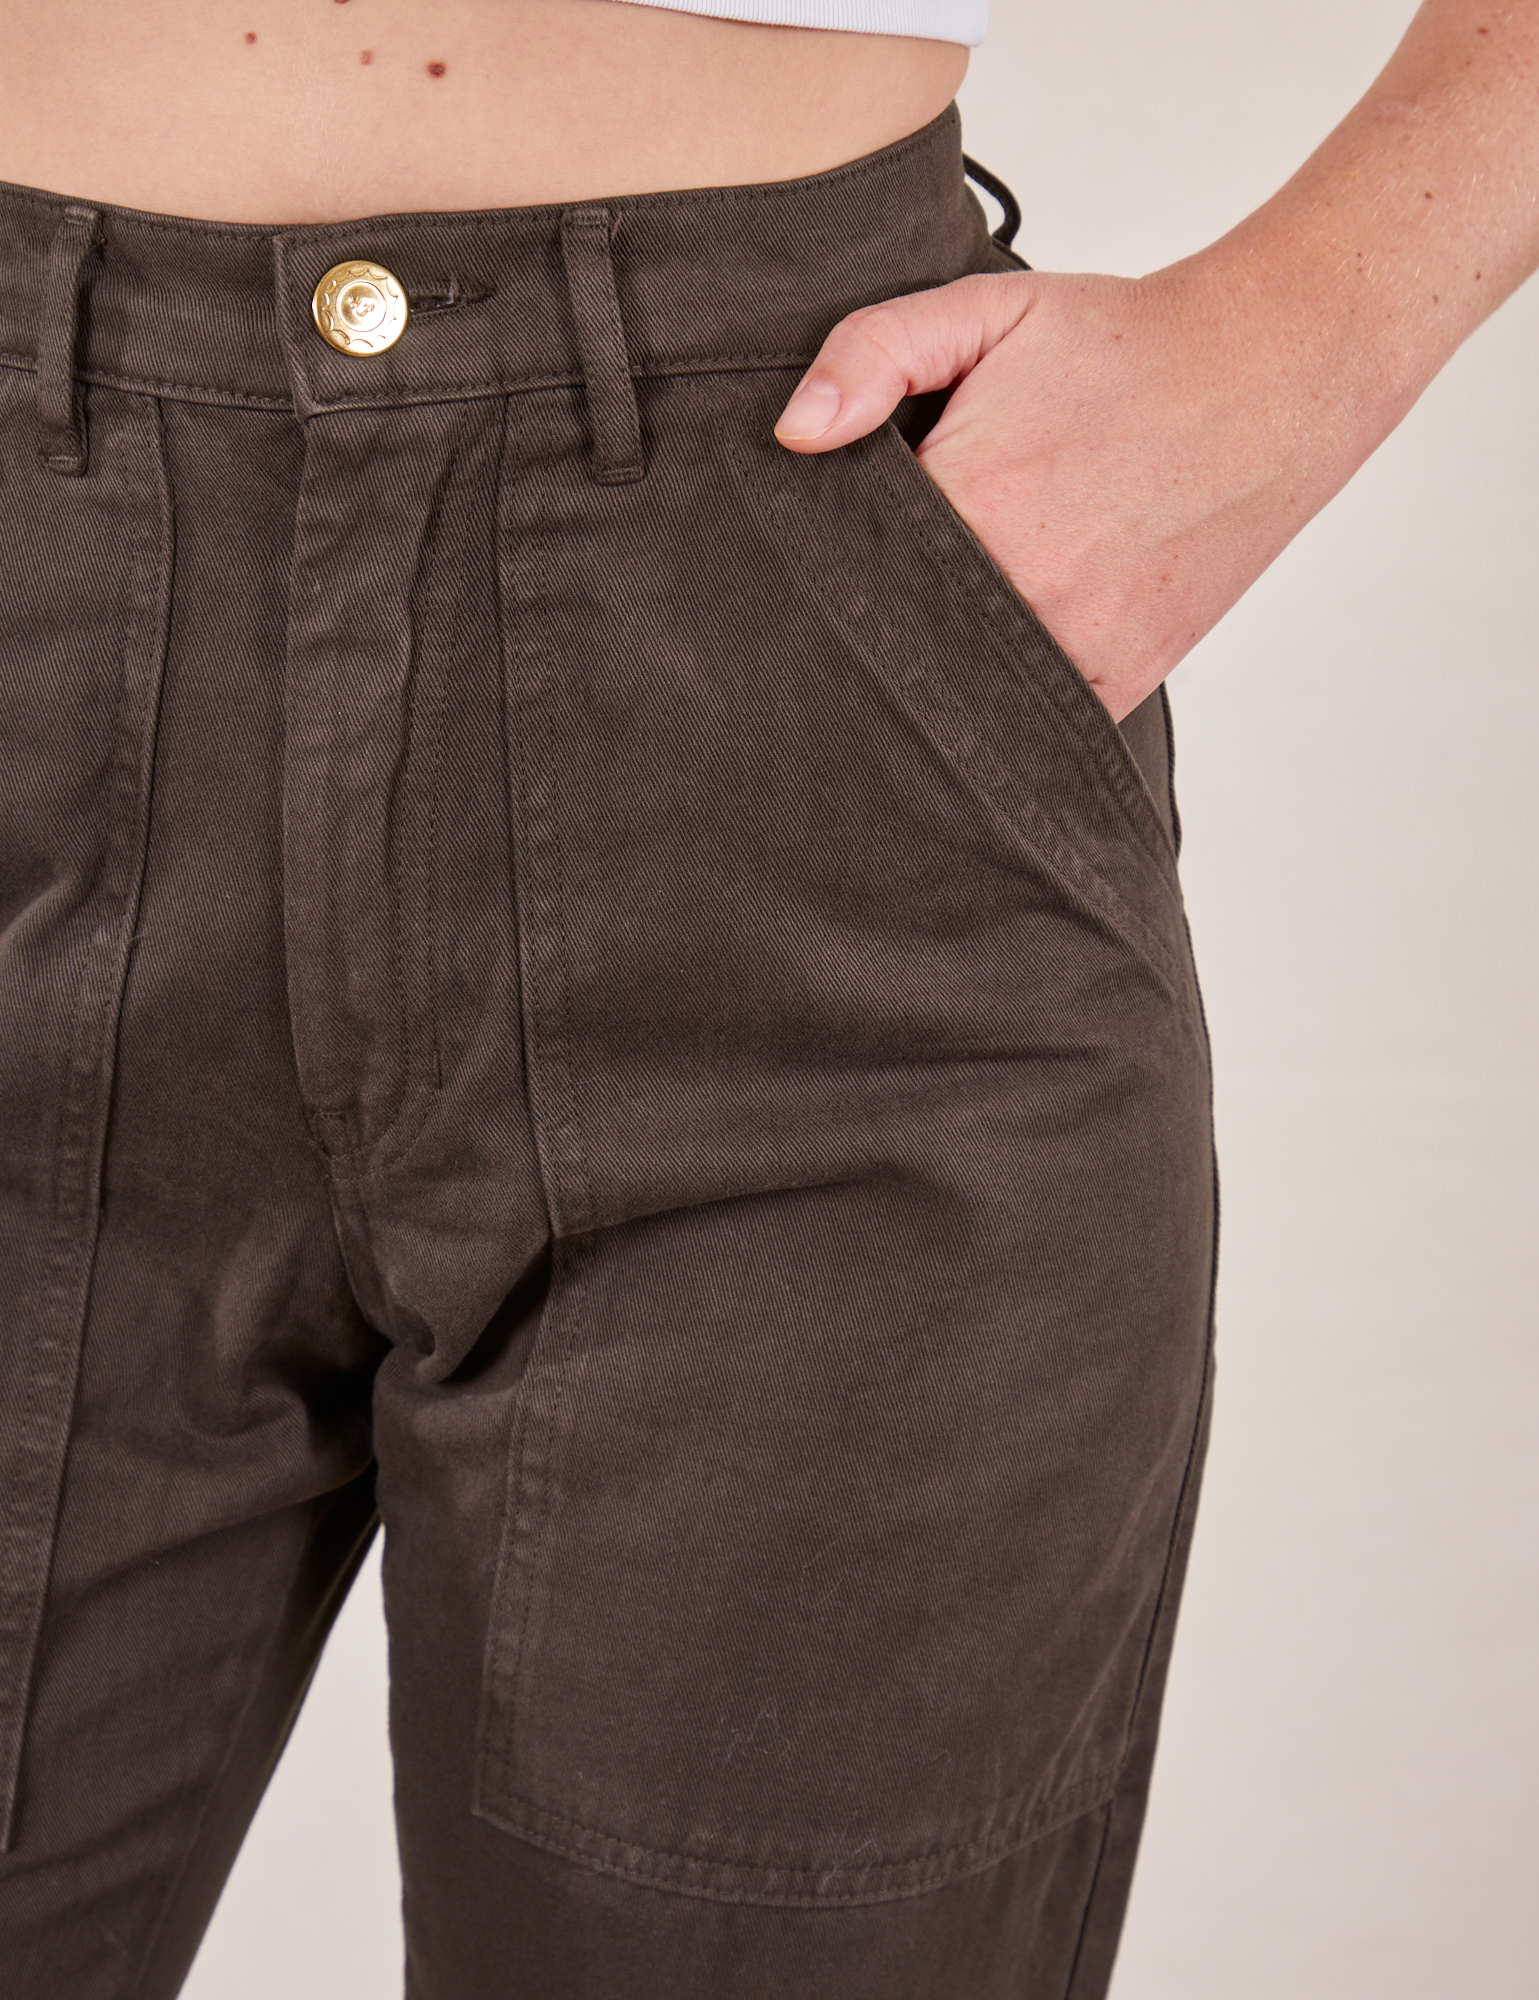 Pencil Pants in Espresso Brown front pocket close up. Scarlett has her hand in the pocket.